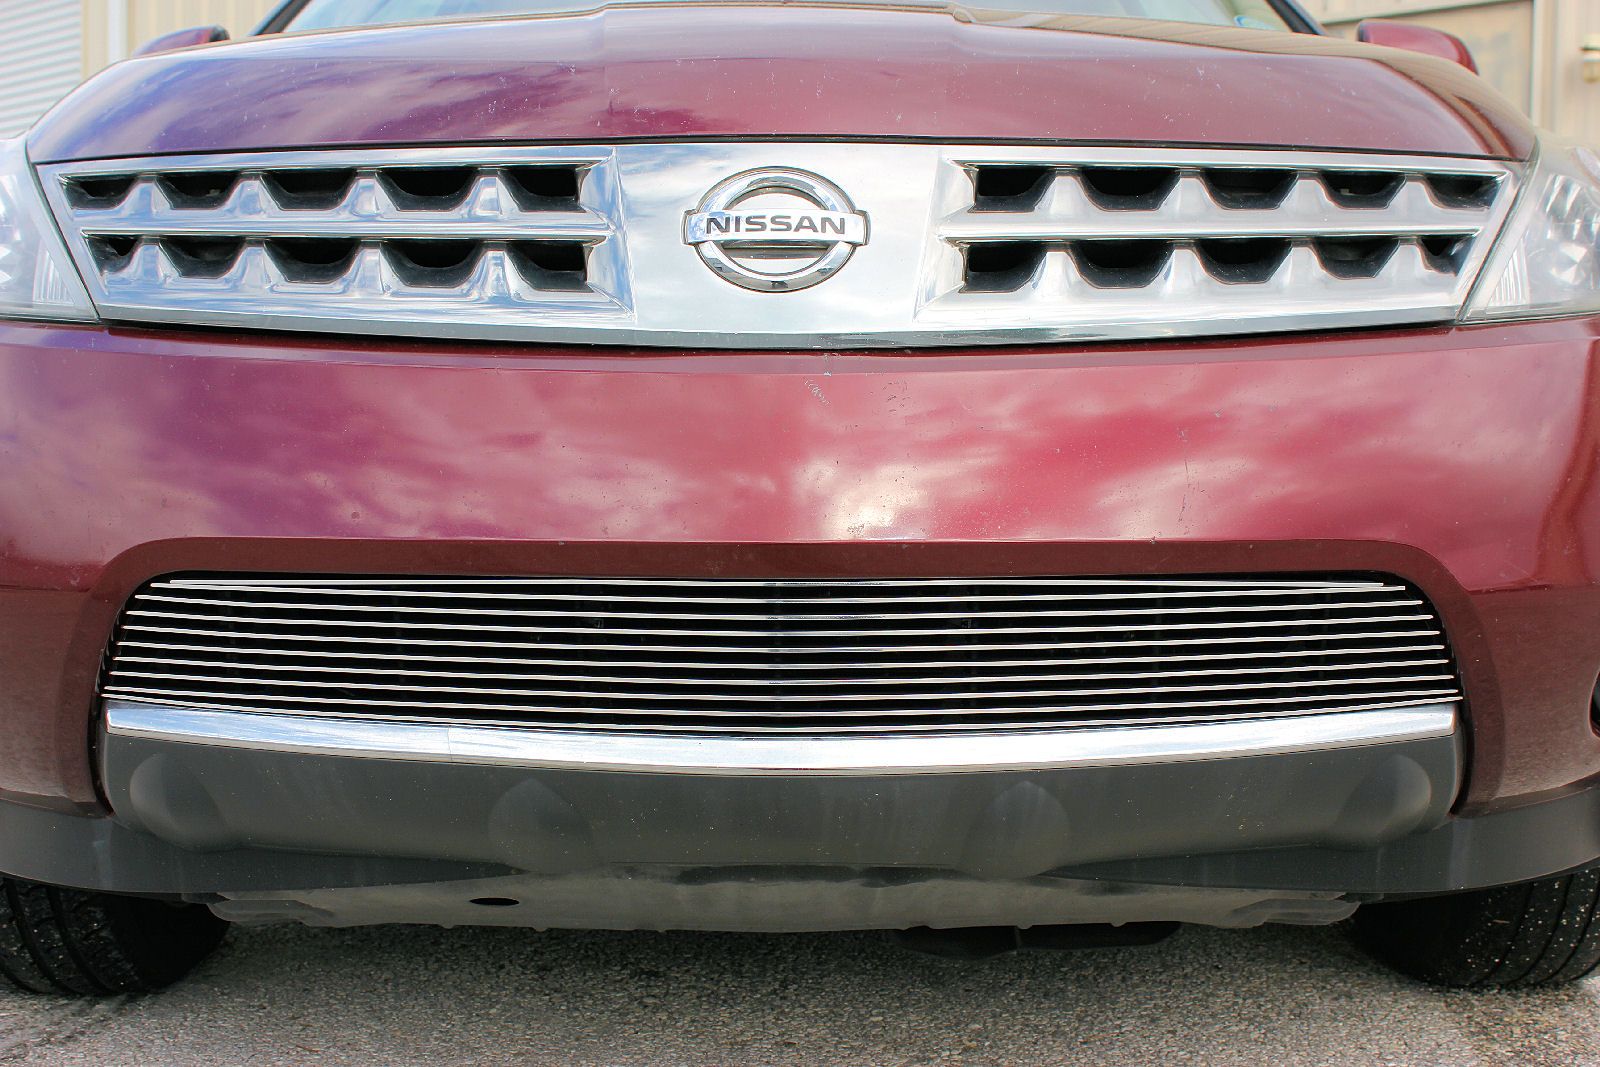 Billet grille for a 06 nissan murano #9